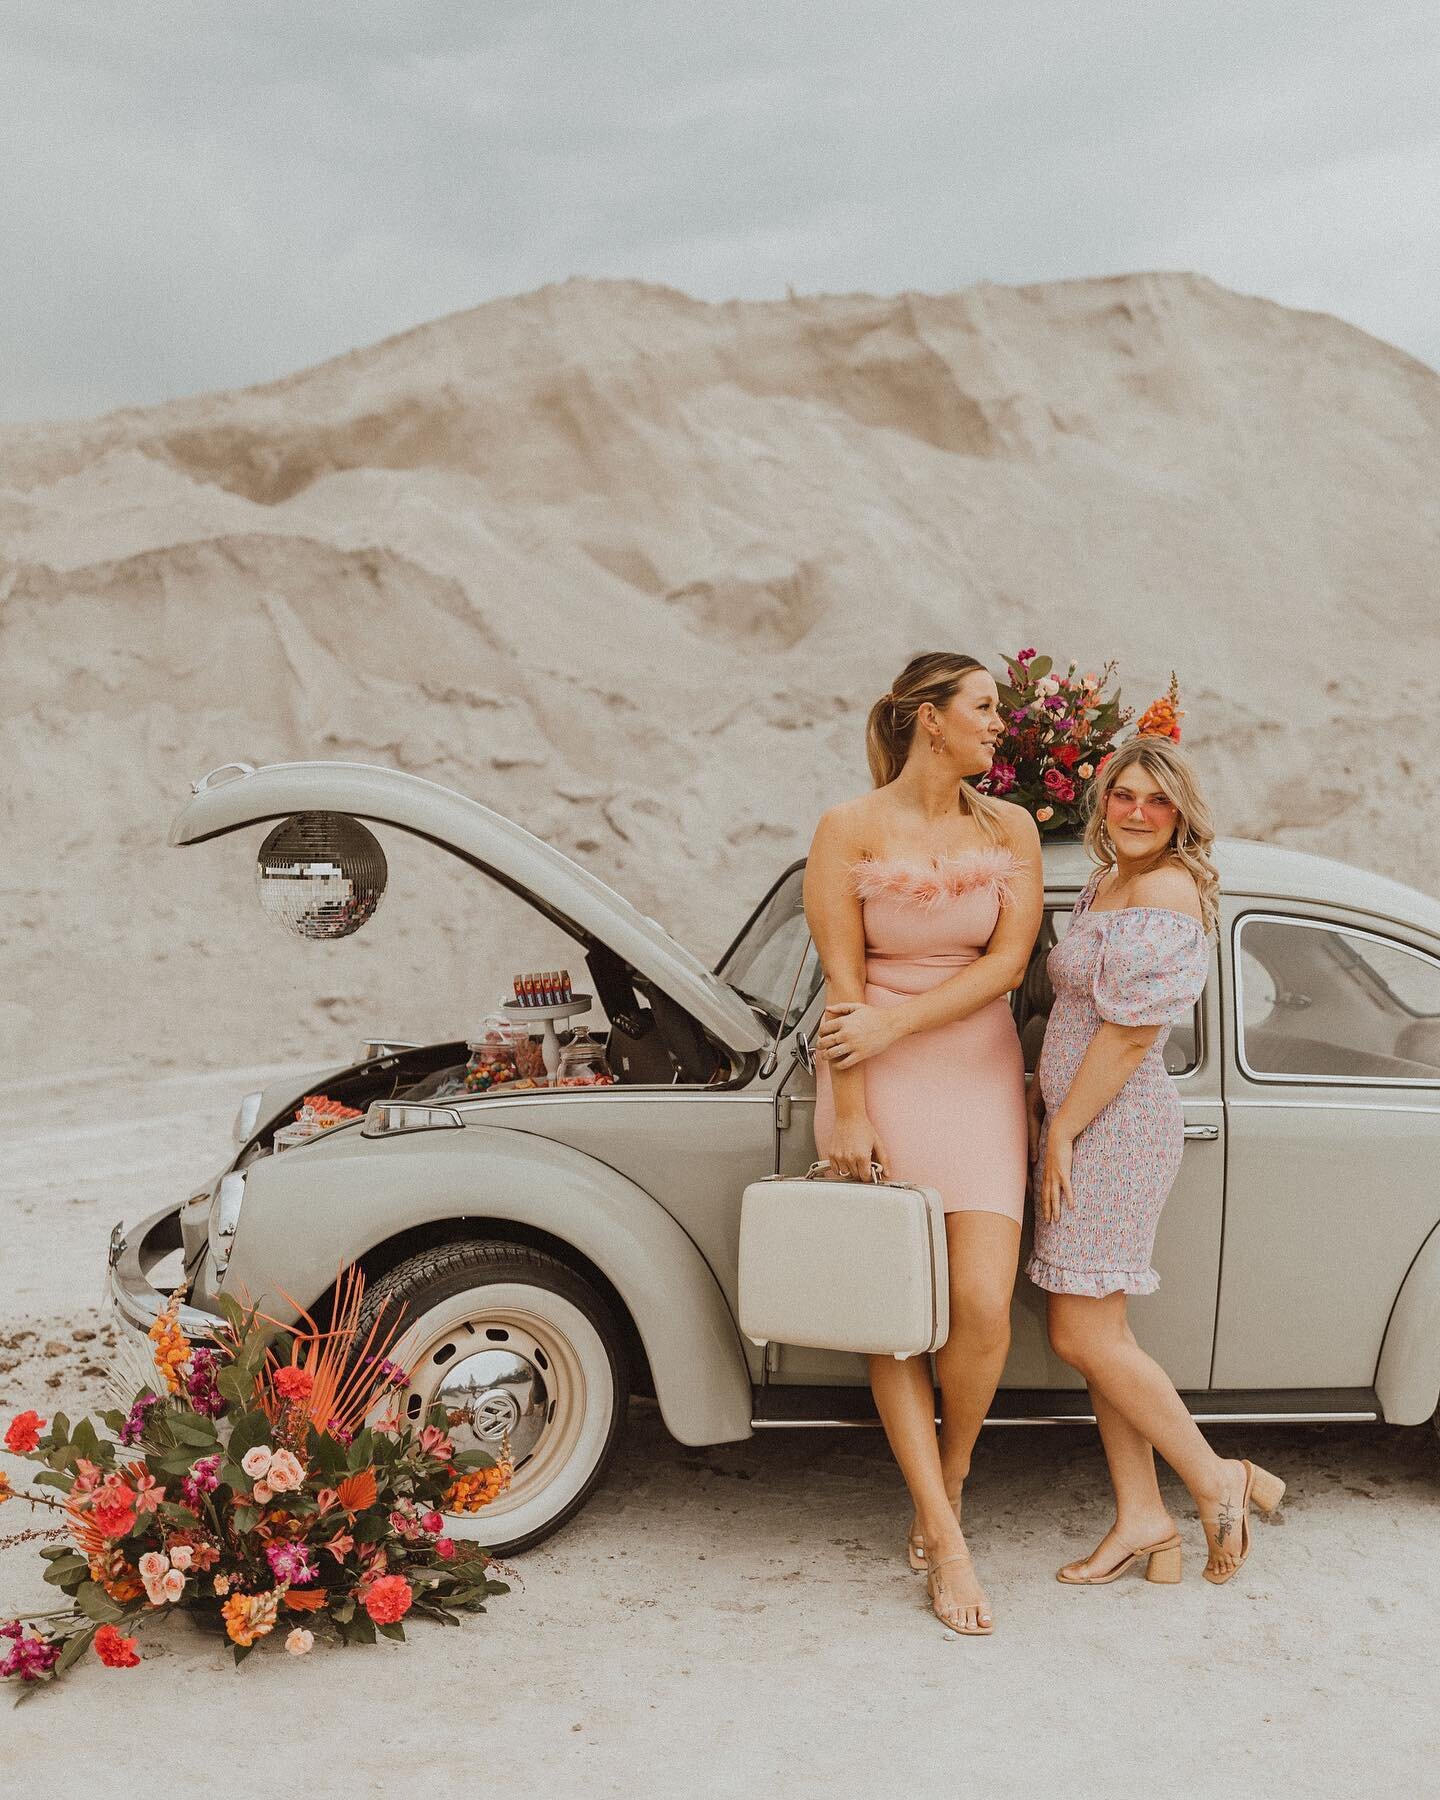 Catch a vibe 🔆🔆🔆 follow the @thesugared.bug 

@missabijo 
.
.
.
.
.
#iowa #desmoines #desmoinesiowa #classiccar #vw #beetle #volkswagen #vwbeetle #vintage #iowaphotography #midwest #candy #flowers #wedding #greenweddingshoes